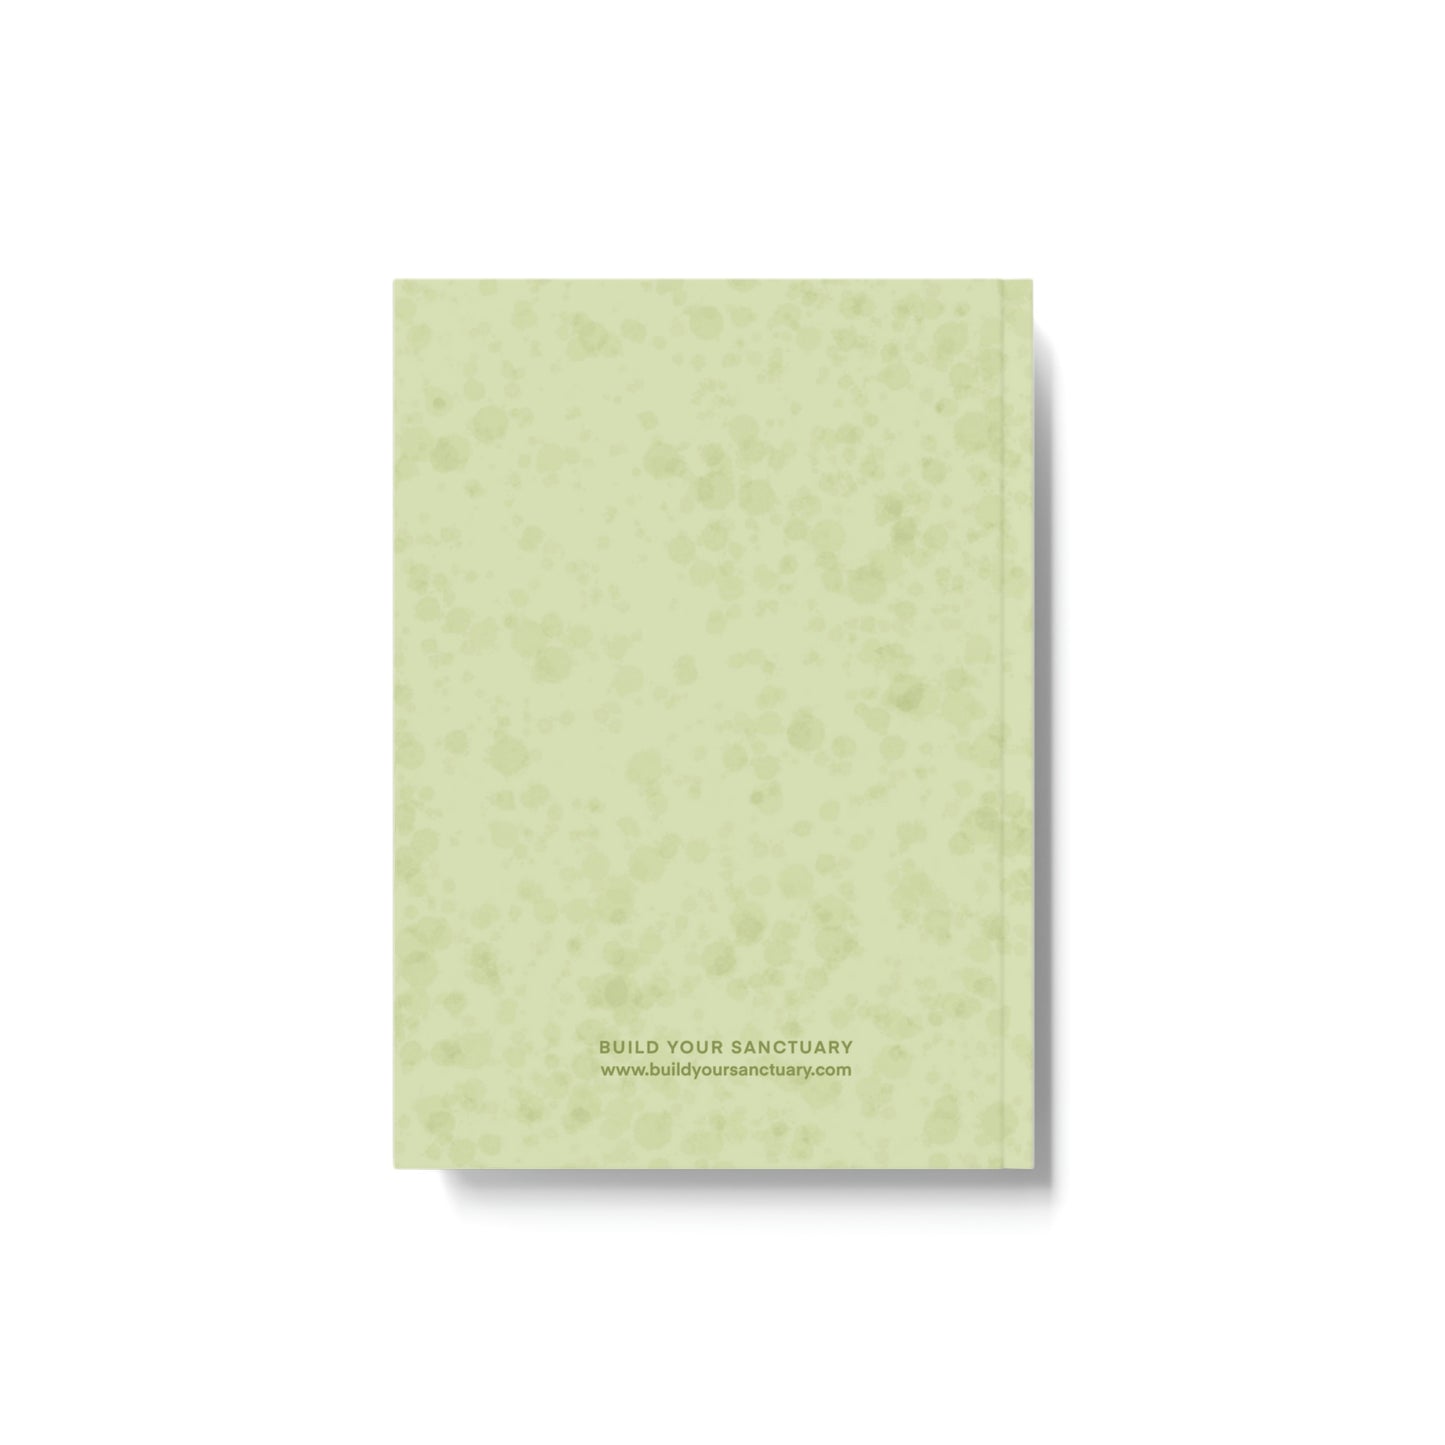 Hardcover Journal | The World Needs Your